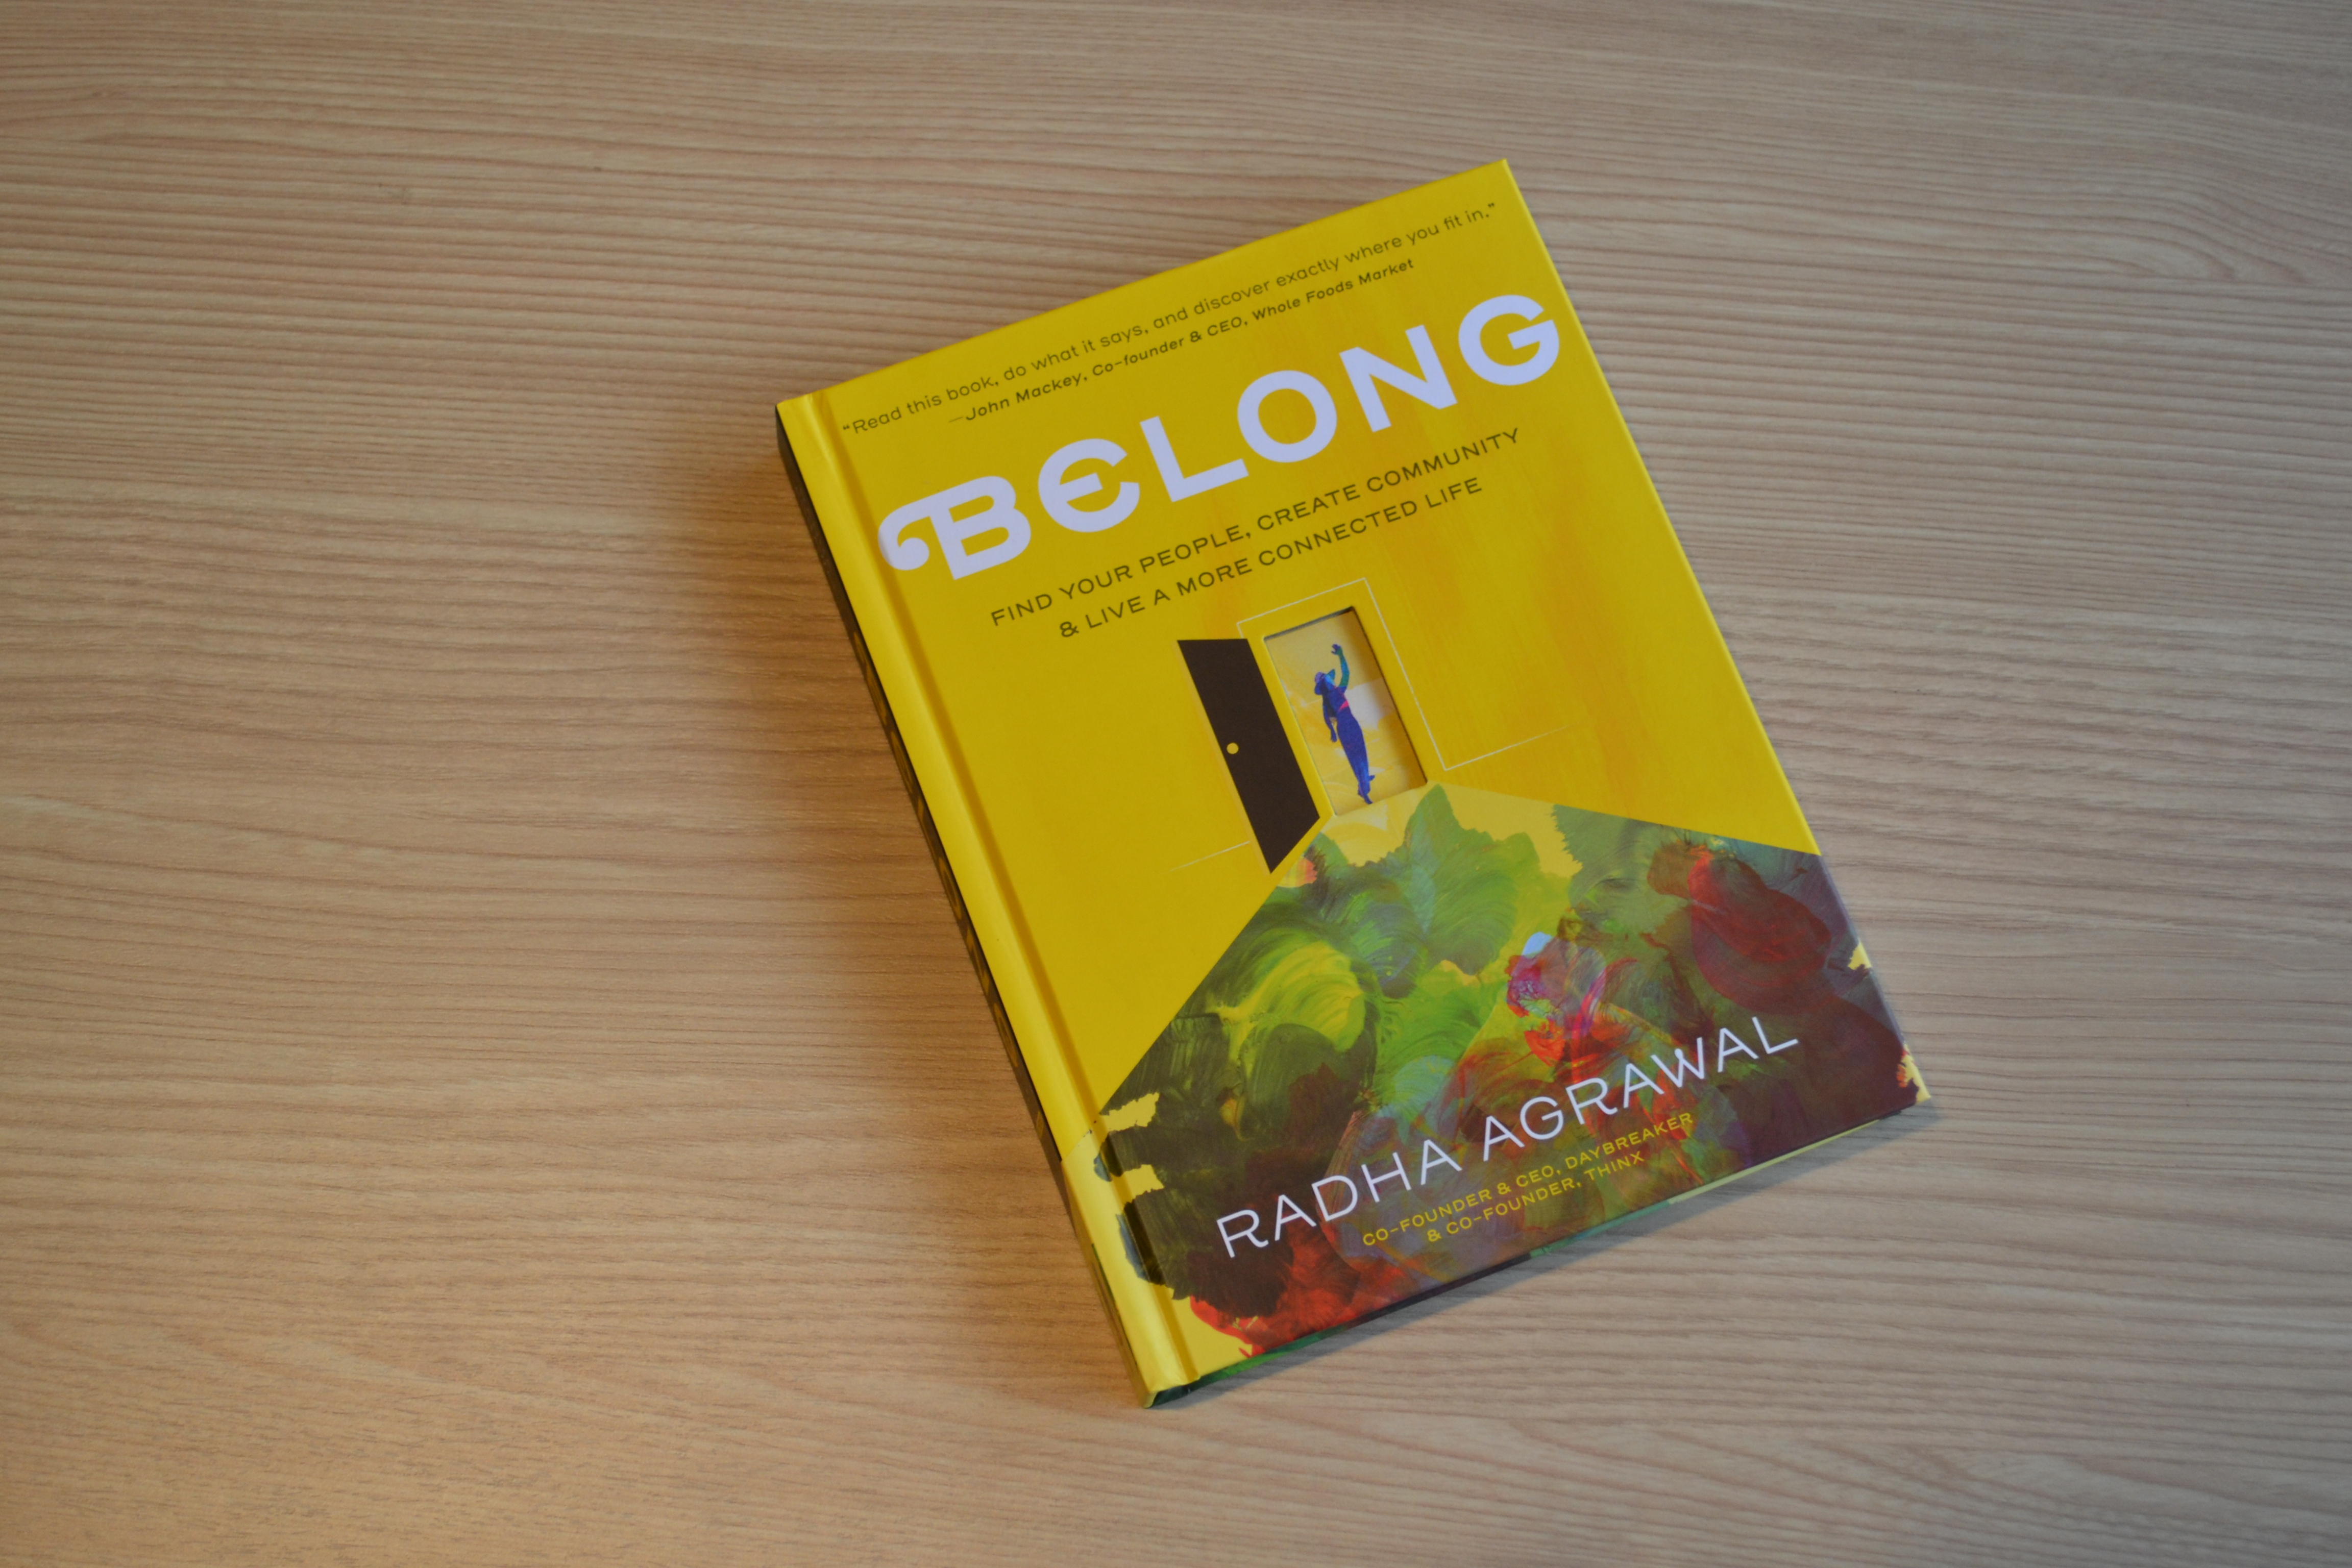 The cover of Belong, the book given to all new students during the summer of 2019